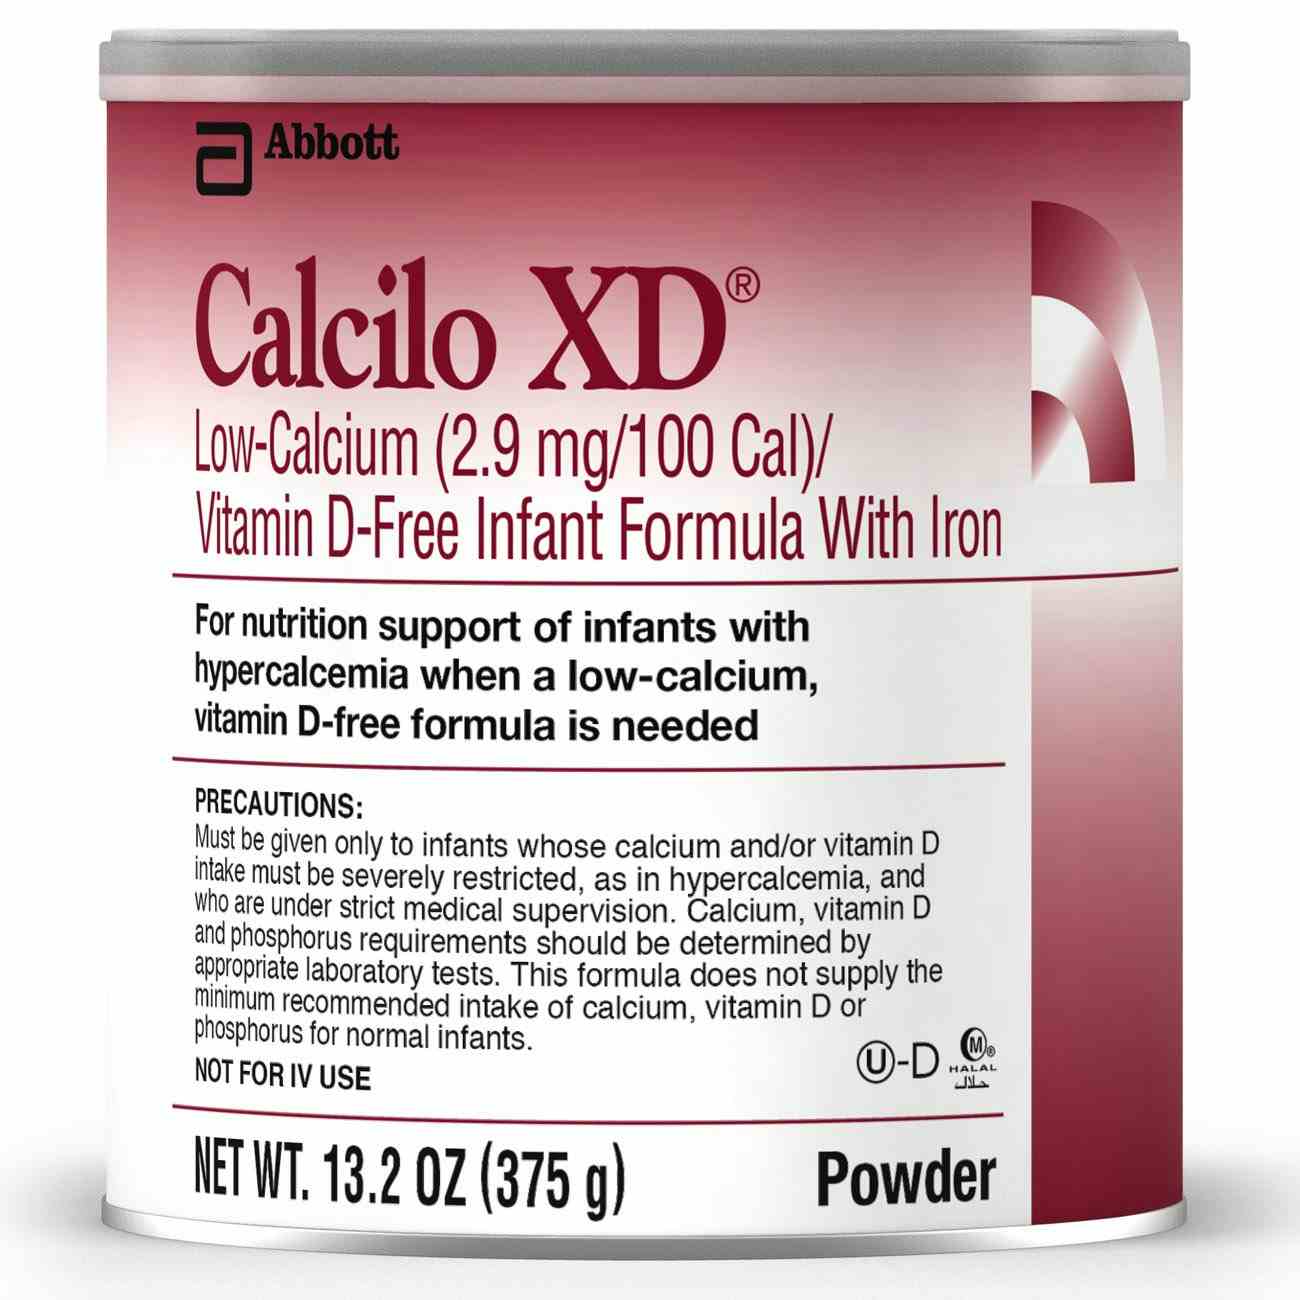 Calcilo XD Low-Calcium/Vitamin D-Free Infant Formula with Iron, 13.2 oz., 53328, 1 Each